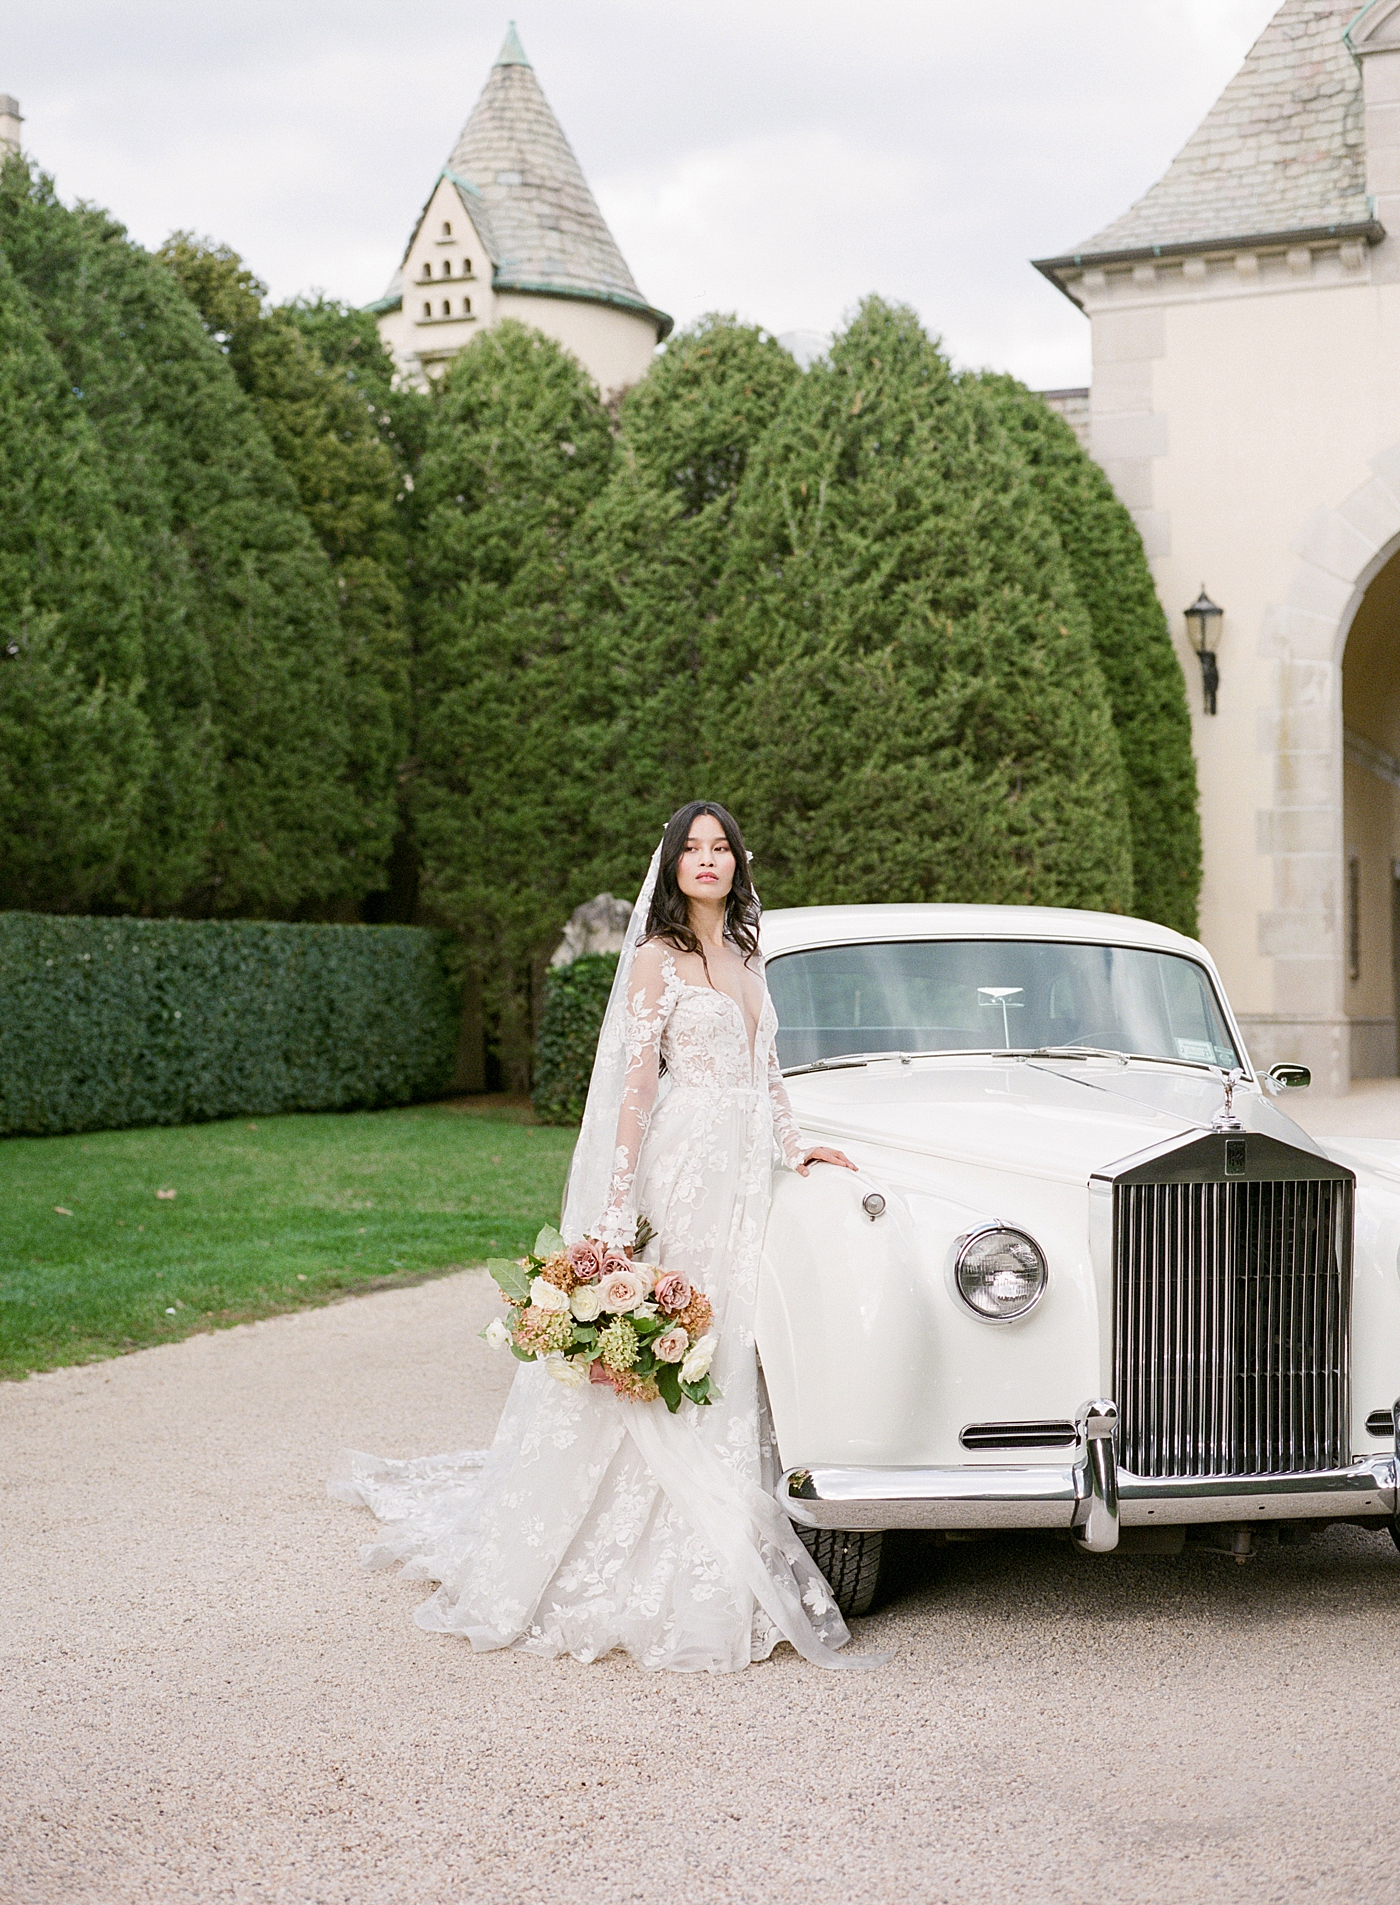 Bride leaning on a classic car in a gravel driveway during Oheka castle wedding | Image by Hope Helmuth Photography